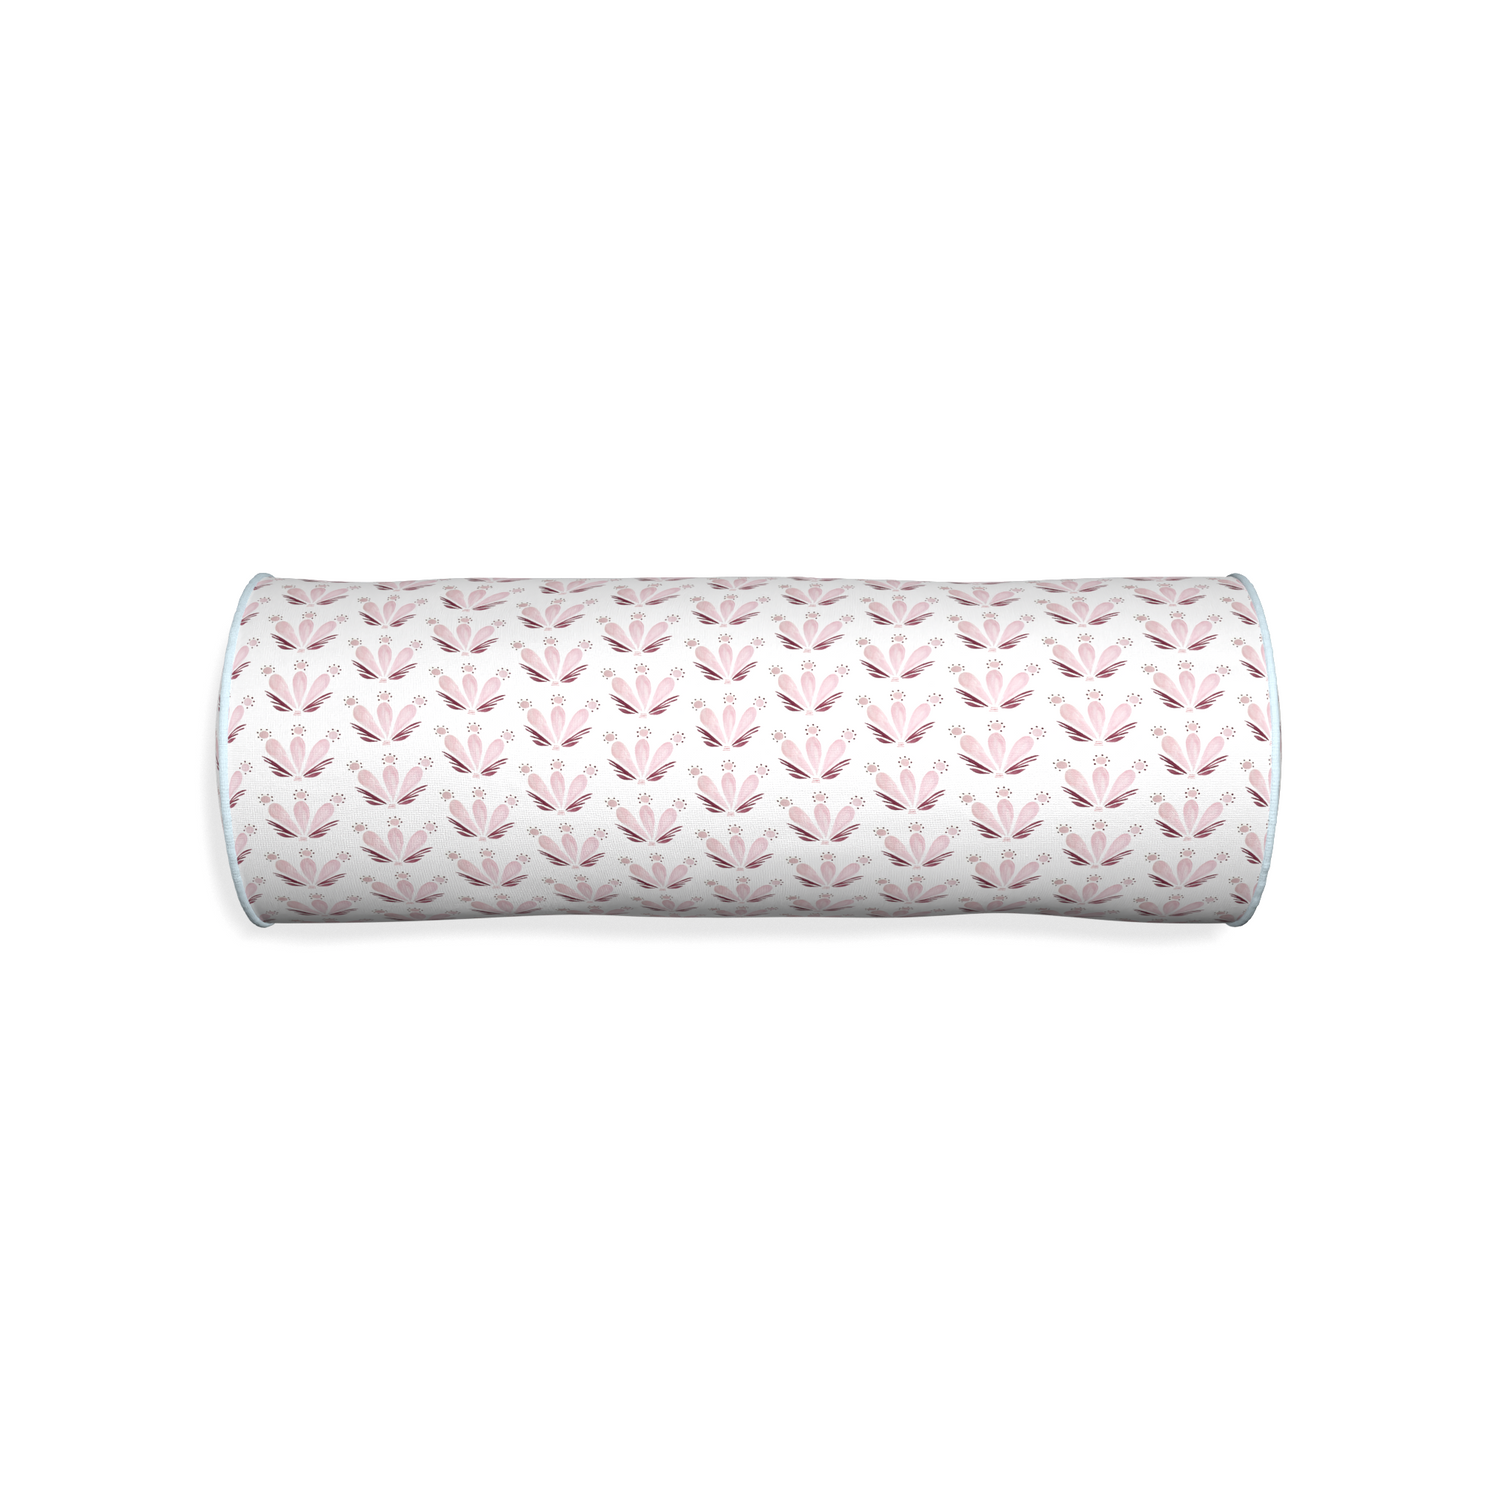 Bolster serena pink custom pink & burgundy drop repeat floralpillow with powder piping on white background